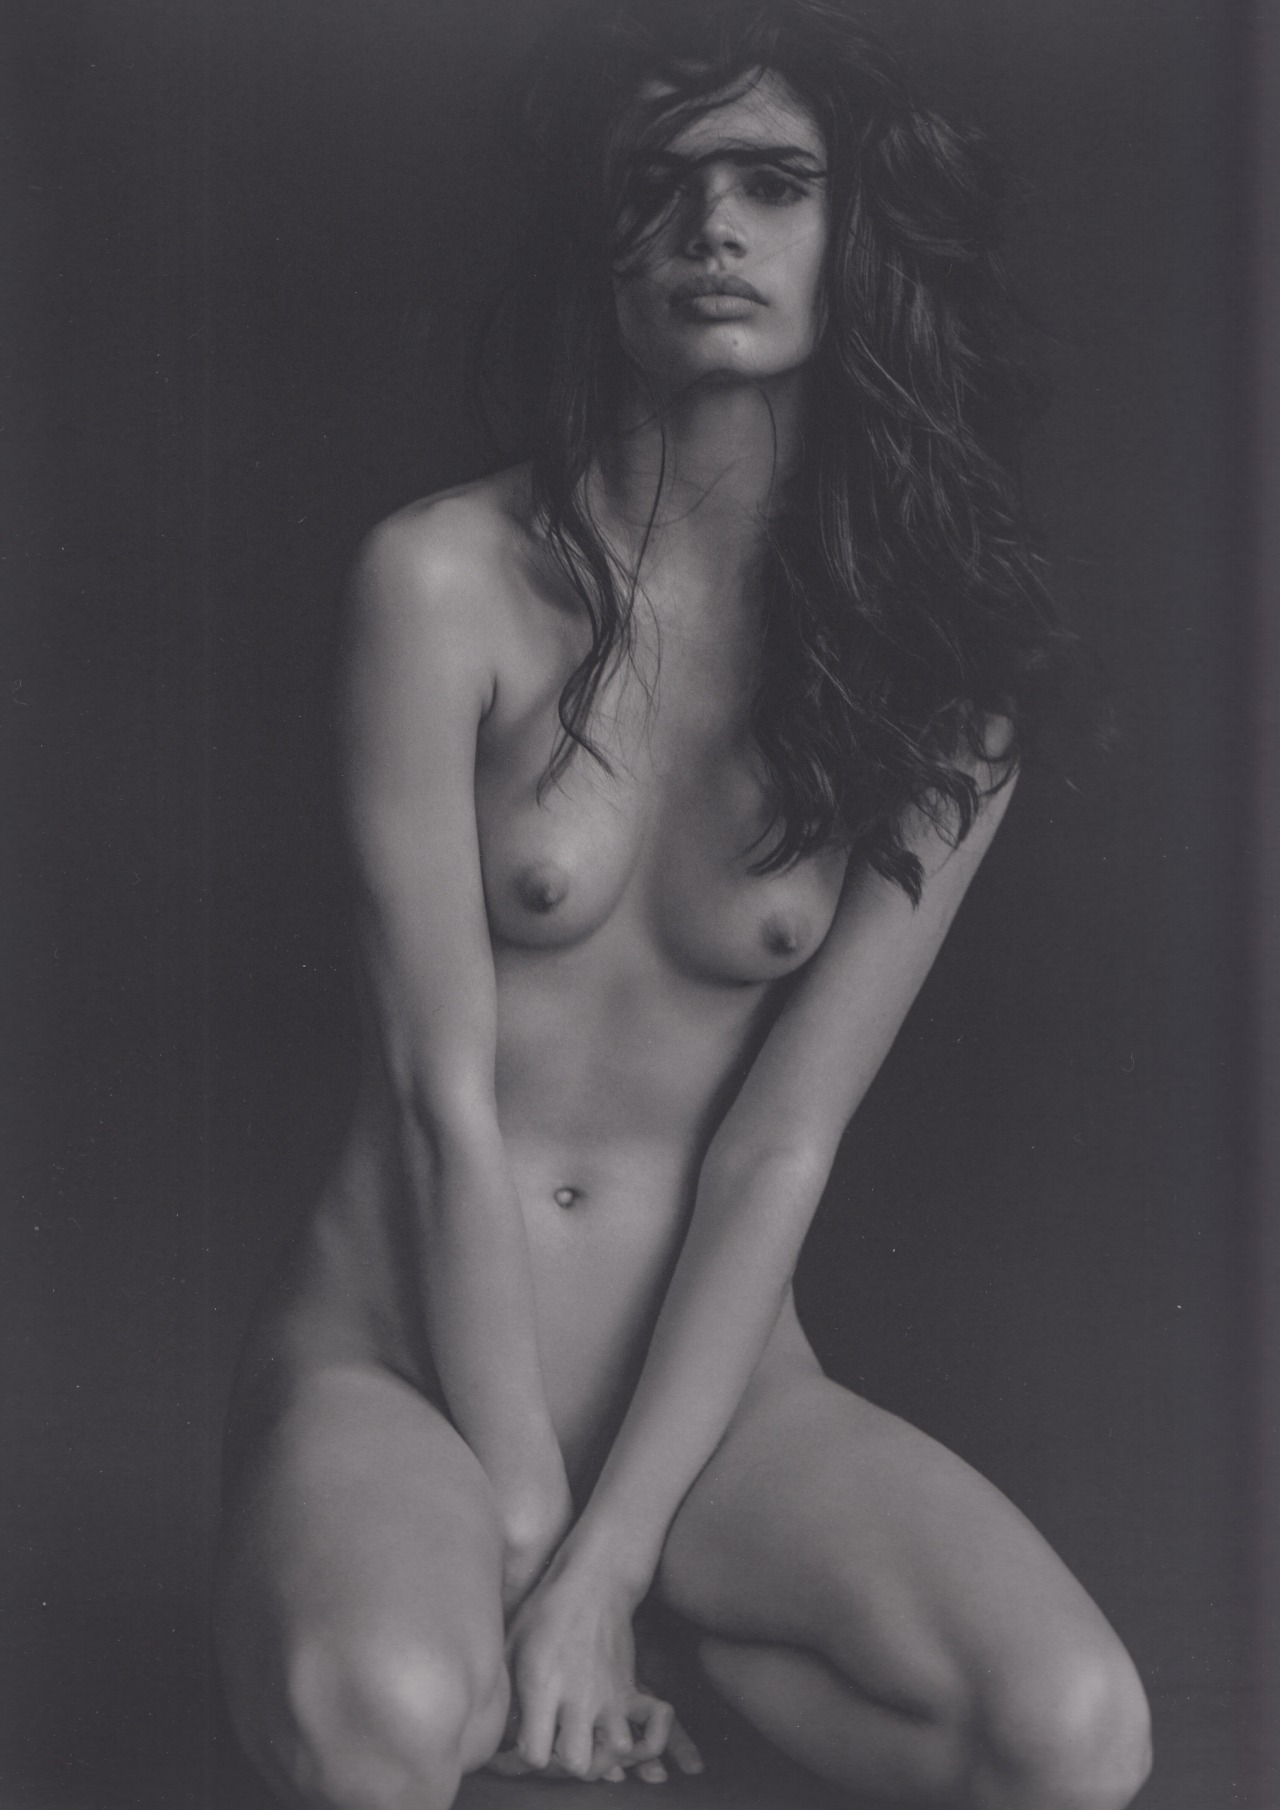 ridiculouslybeautifulwomen1:  Sara Sampaio, “Angels” by Russell James Buy the